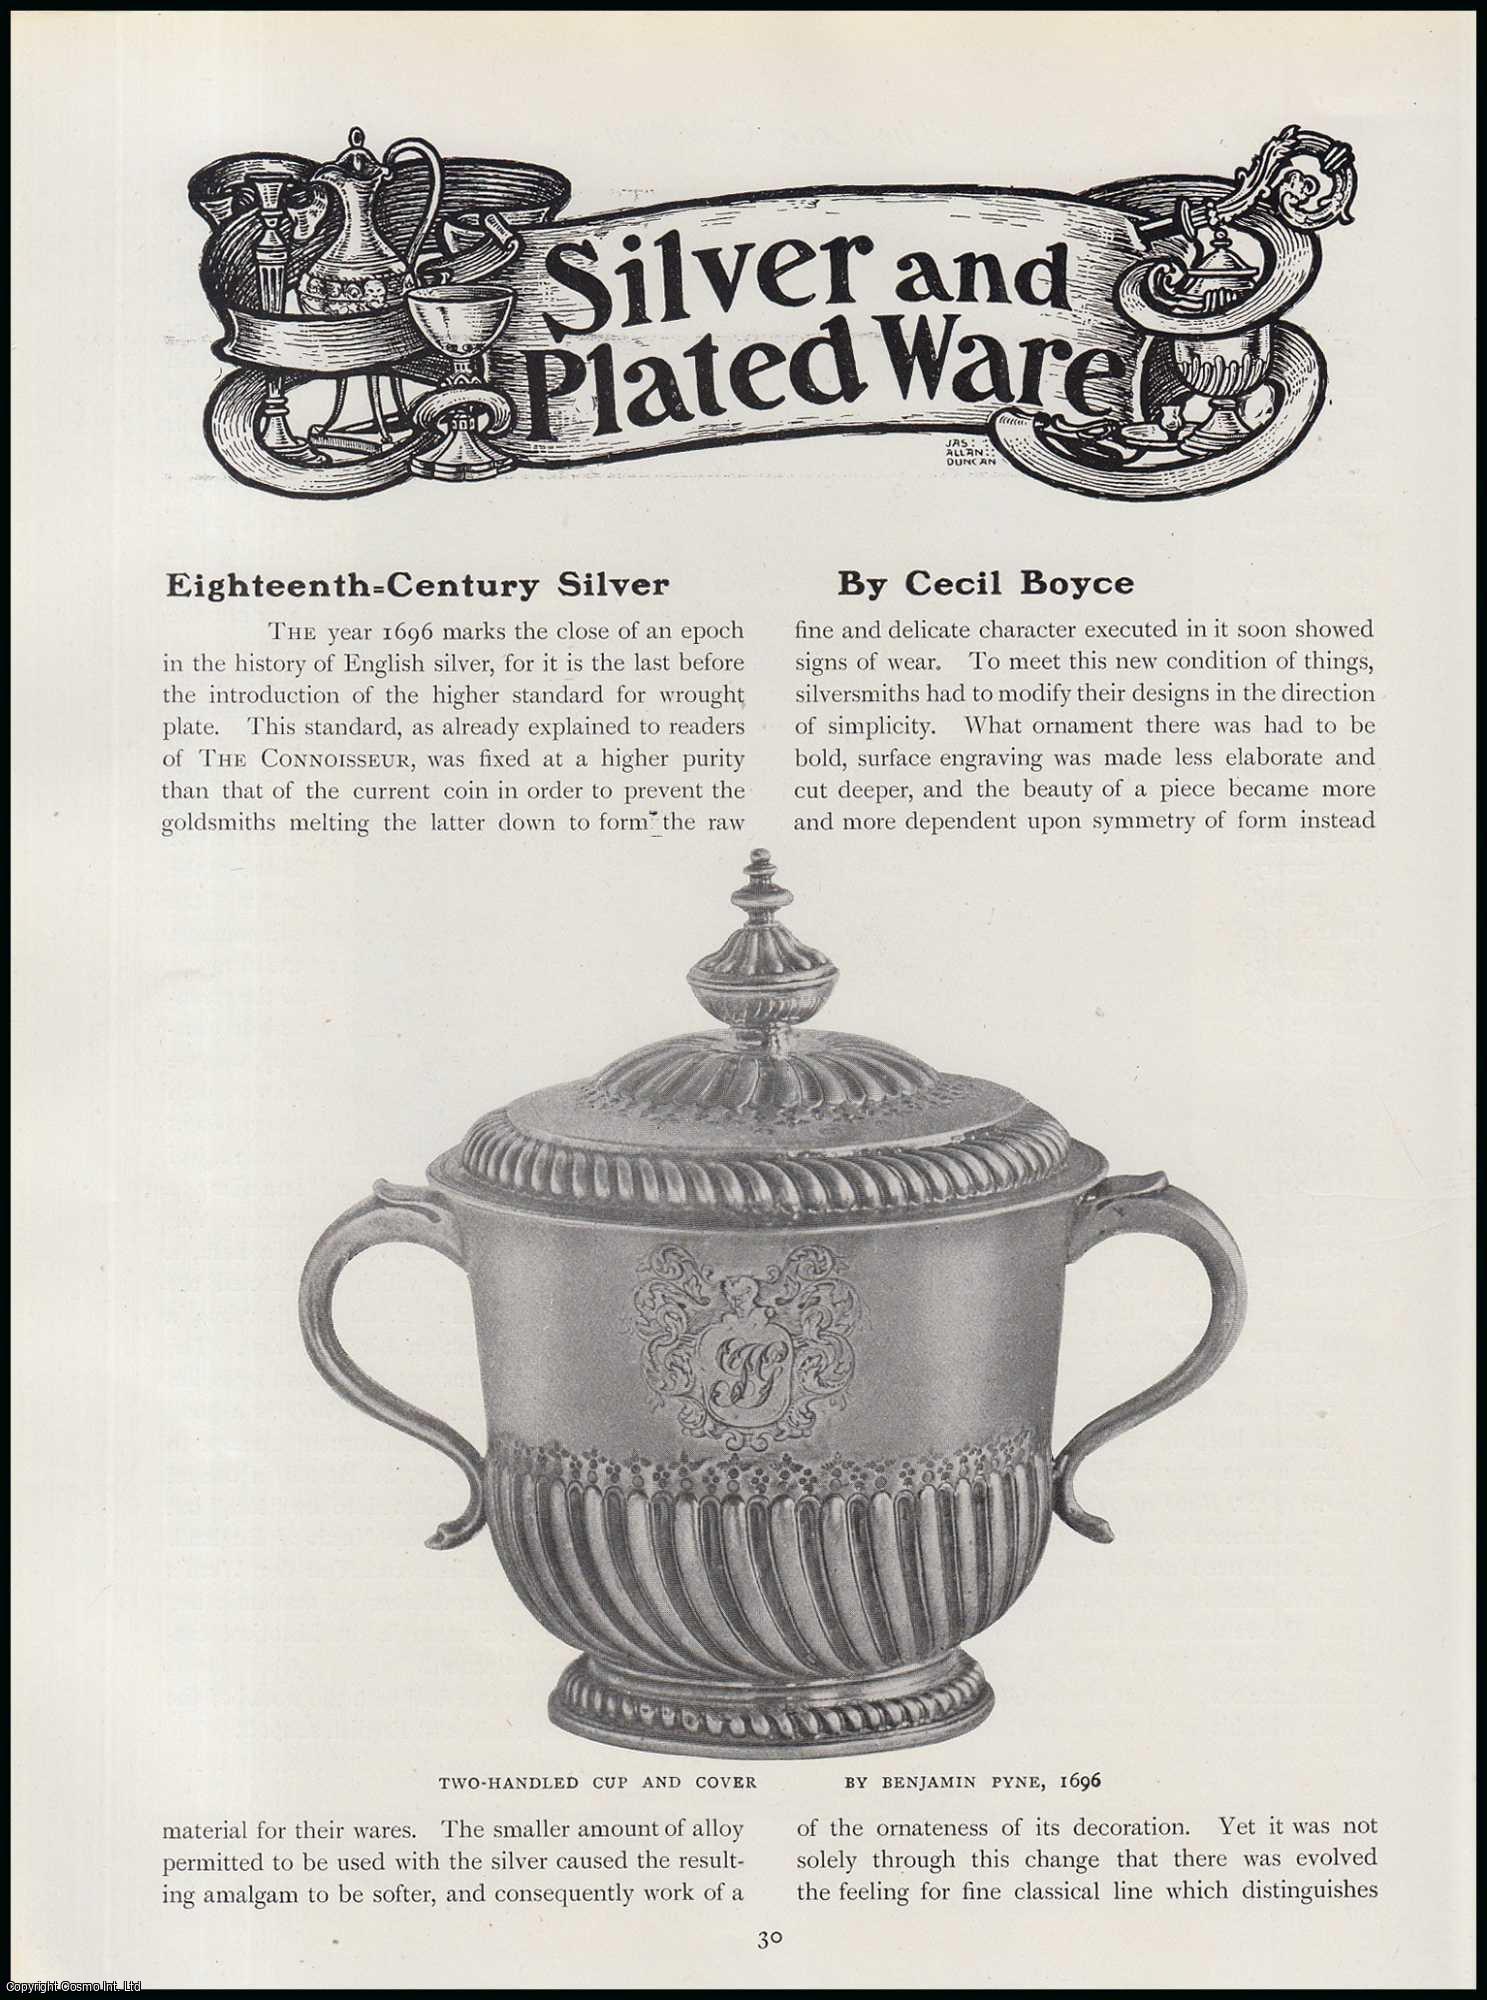 Cecil Boyce - Eighteenth-Century Silver. An original article from The Connoisseur, 1917.